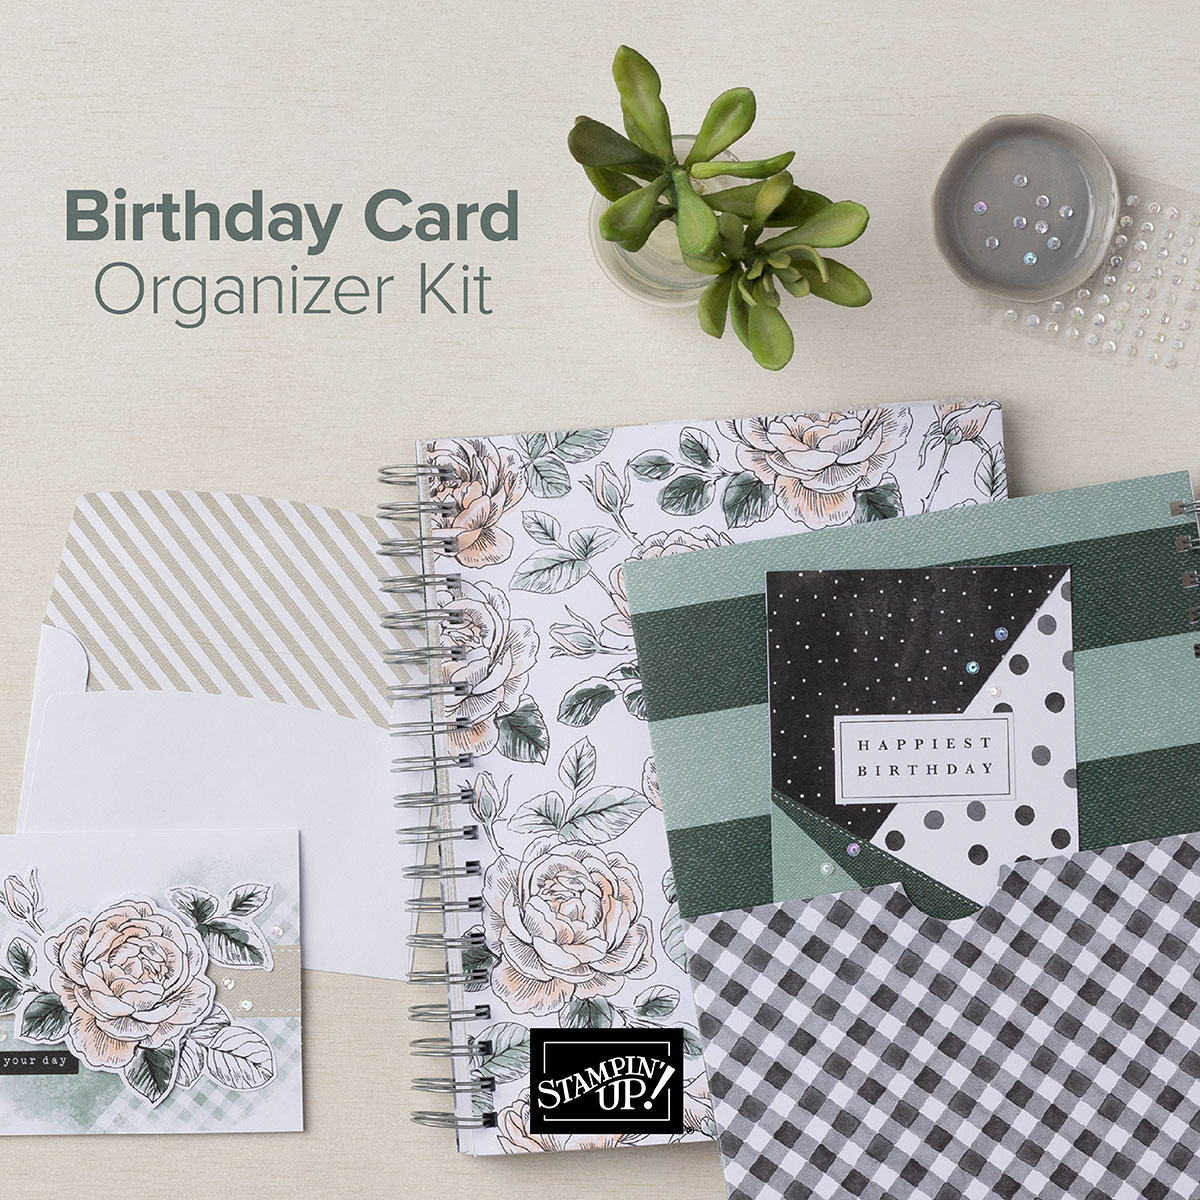 Birthday Card Organizer - Kits Collection | Join Stampin’ Up! | Frequently Asked Questions about becoming a Stampin’ Up! Demonstrator | Join the Craft Stampin’ Crew | Stampin Up Demonstrator Linda Cullen | Crafty Stampin’ | Purchase Stampin’ Up! Product | FAQ about Paper Pumpkin | FAQ about Kits Collection Birthday Card Organizer Kit [161056] | Stamparatus [146276] | Clear Block D [118485] | Clear Block I [118488] | Simply Shammy [147042] | Stampin' Scrub [126200] | Stampin' Mist [153648] | Paper Snips Scissors [103579] | Take Your Pick [144107] | Bulk Clear-Mount Stamp Cases [119105] | Grid Paper [130148] | Small Grid Paper [149621] | Stampin' Pierce Mat [126199] | Bone Folder [102300] | Stampin' Dimensionals [104430] | Stampin' Seal [152813] | Multipurpose Liquid Glue [110755] |